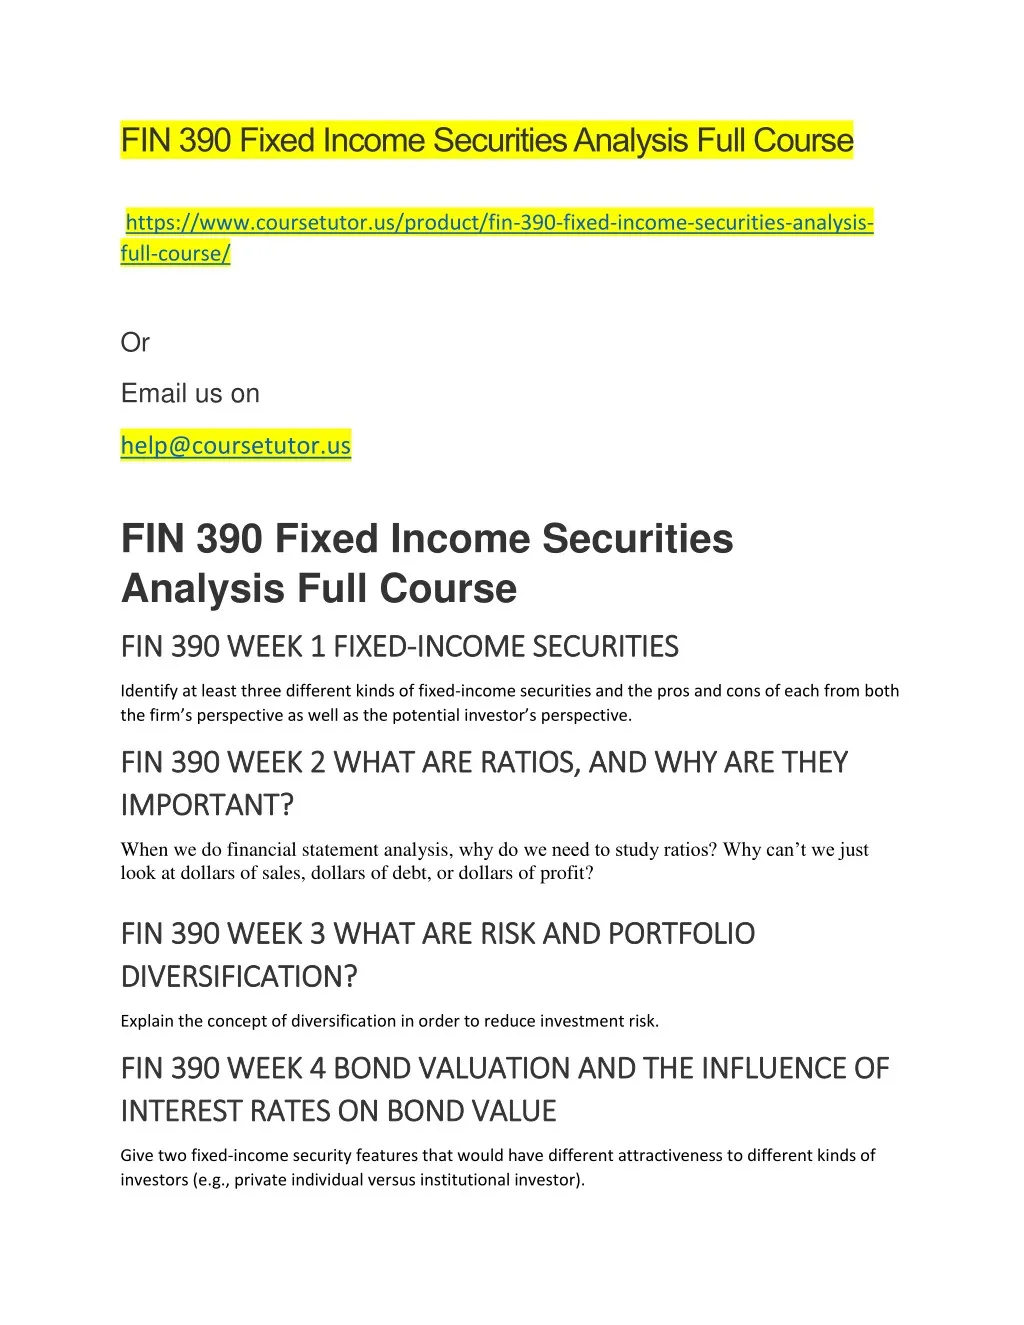 fin 390 fixed income securities analysis full